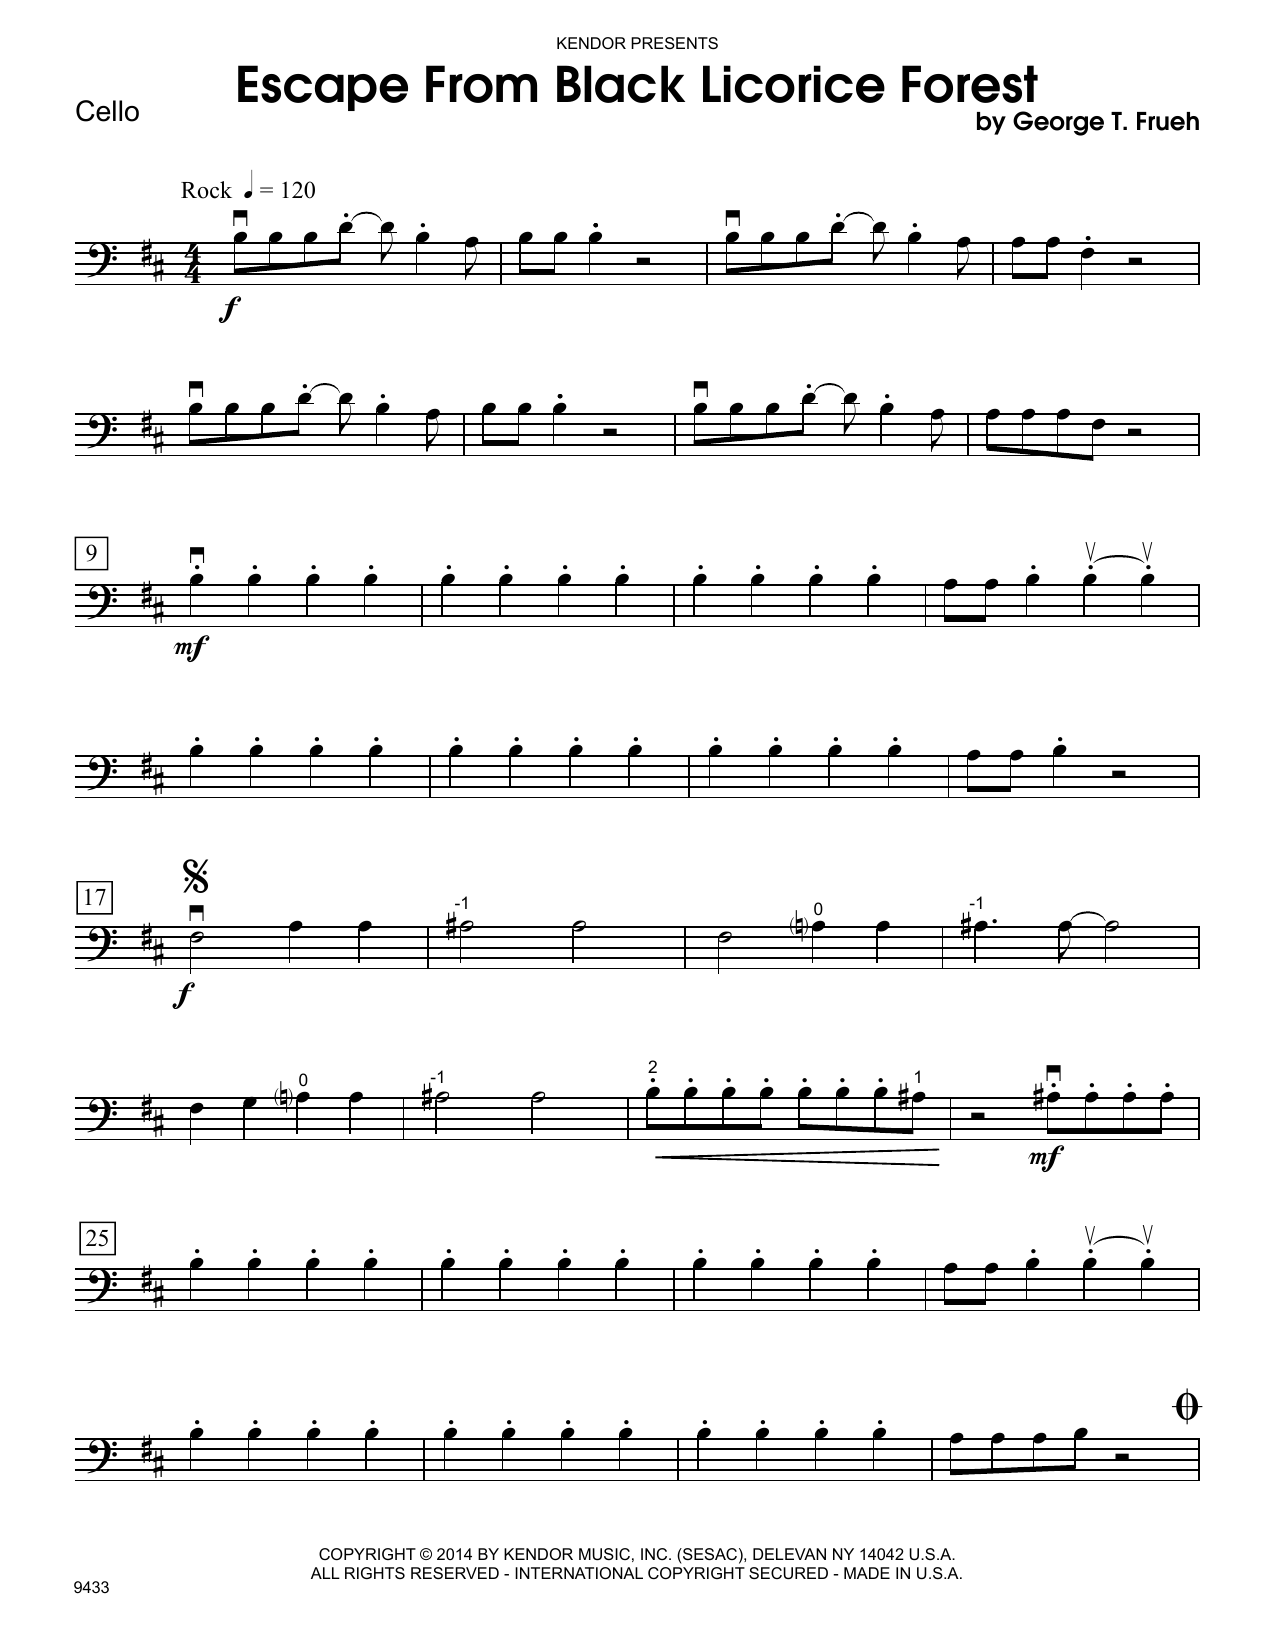 Escape From Black Licorice Forest - Cello sheet music